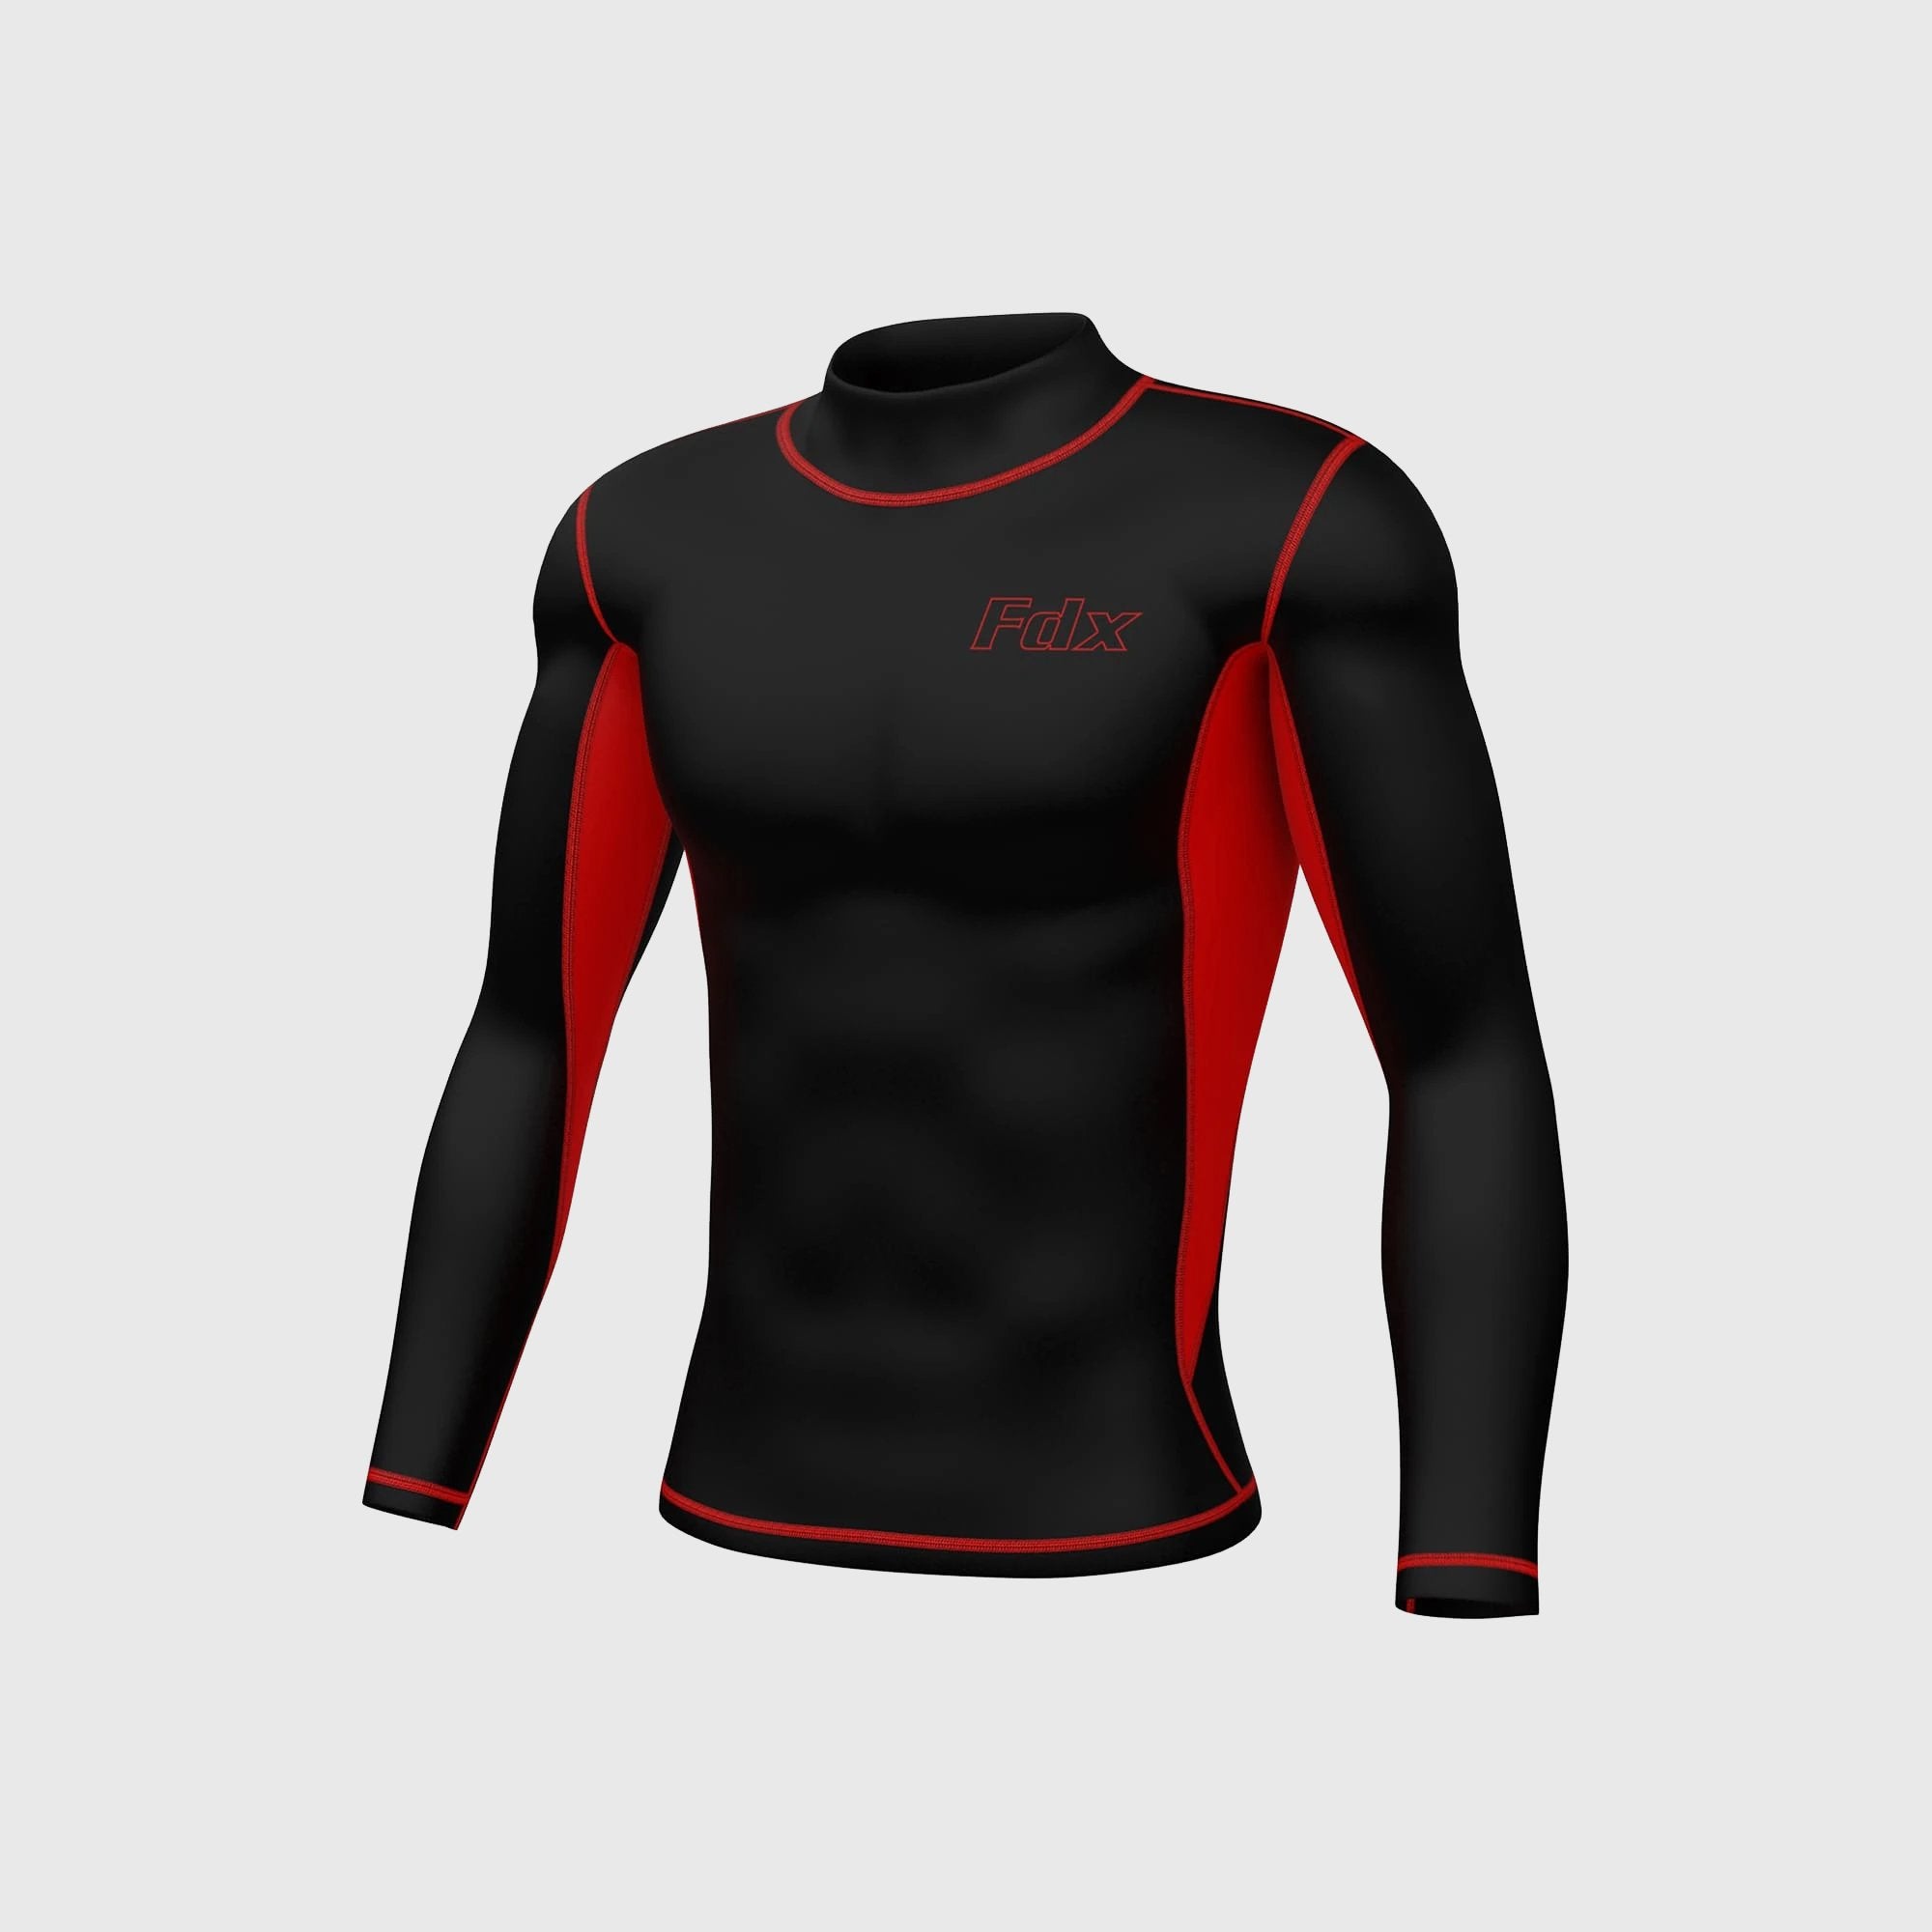 Fdx Inorex Red Men's Thermal Winter Base Layer Compression Top